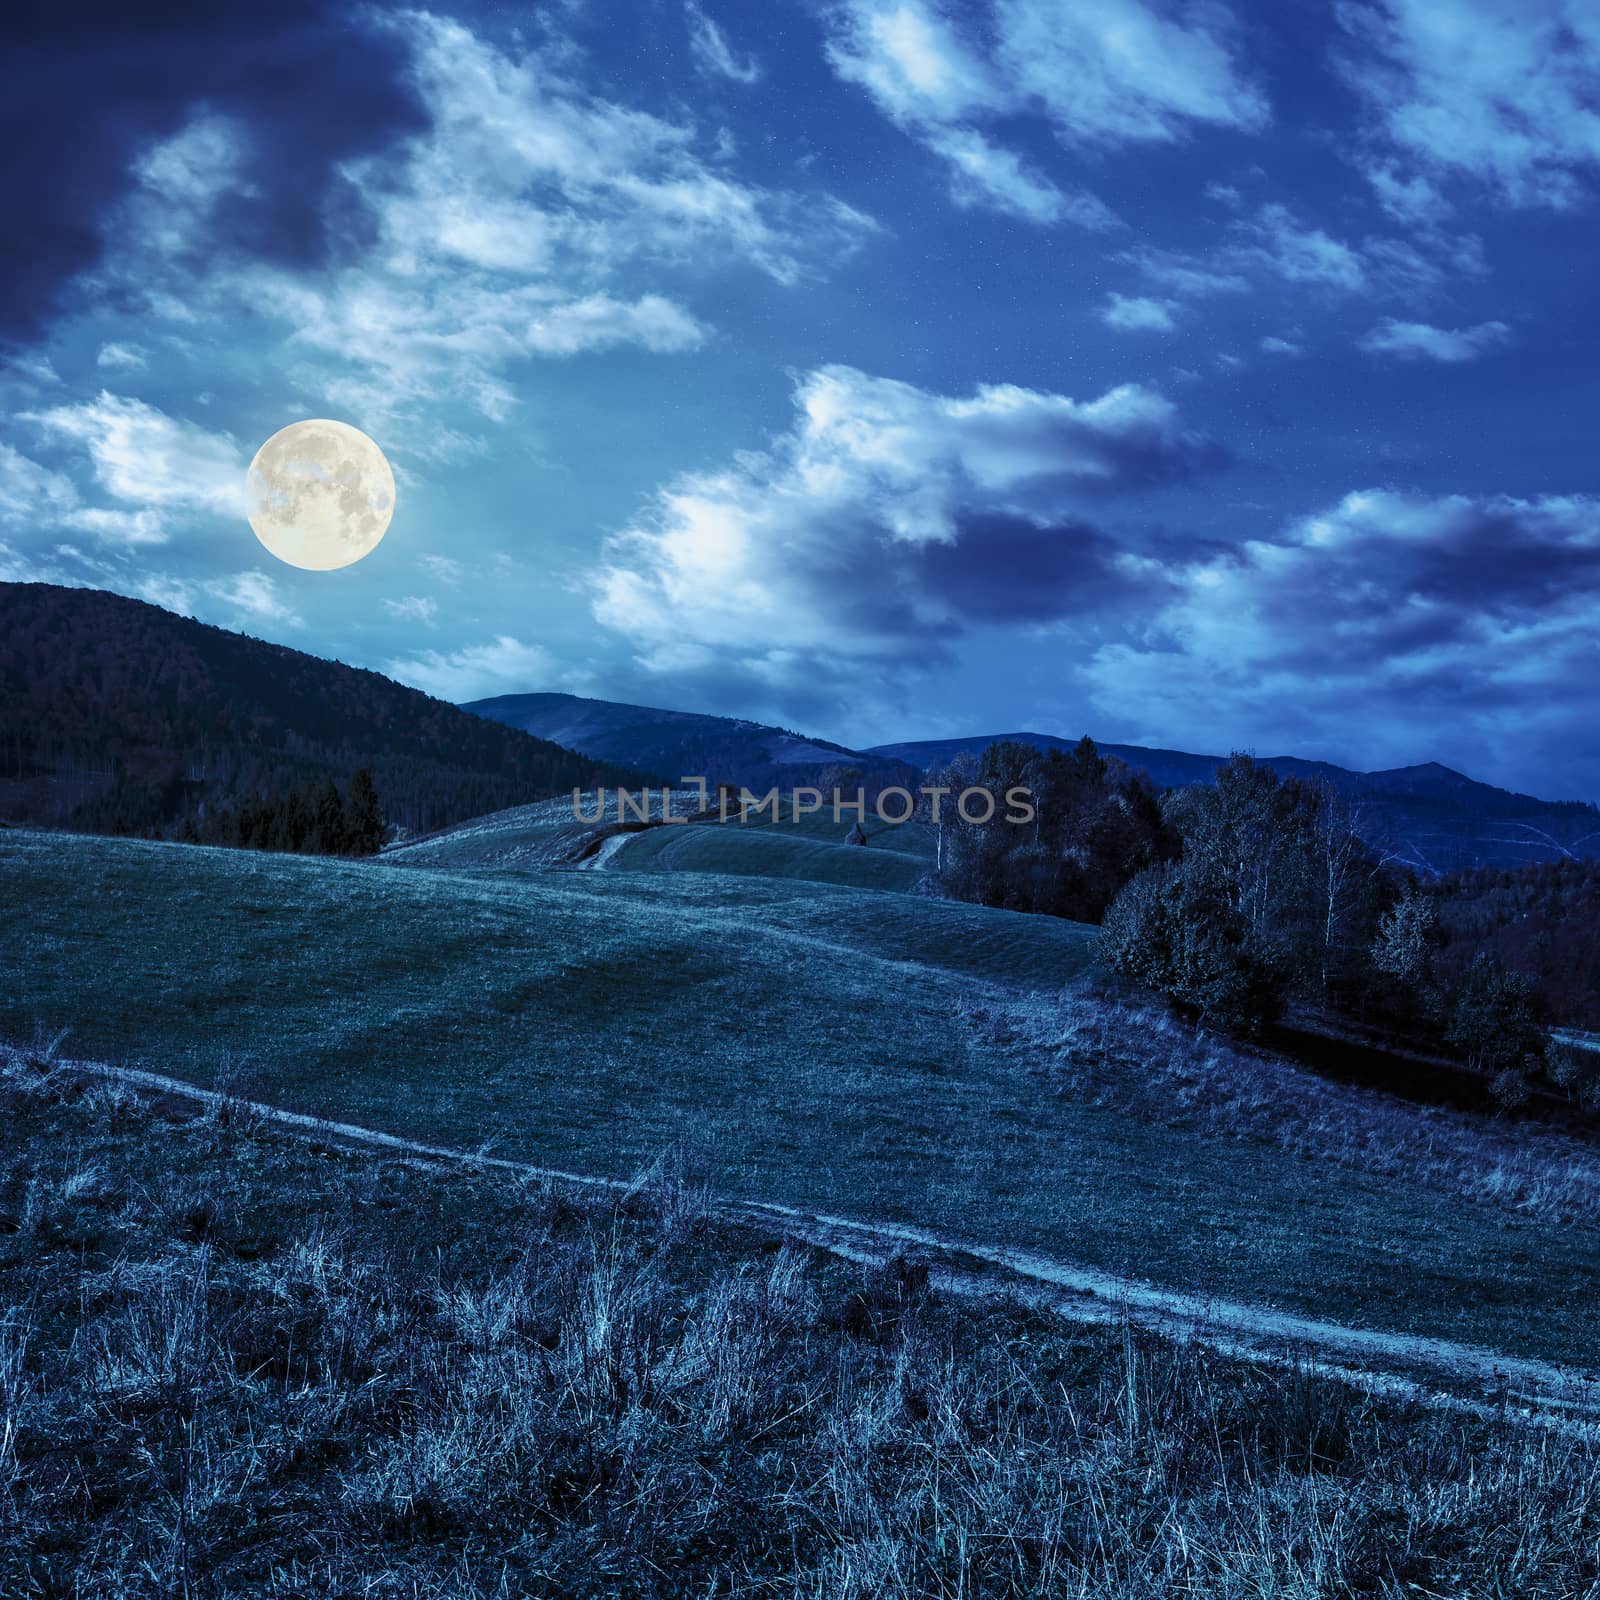 yellow and orange trees on autumn meadow in mountains at night in full moon light